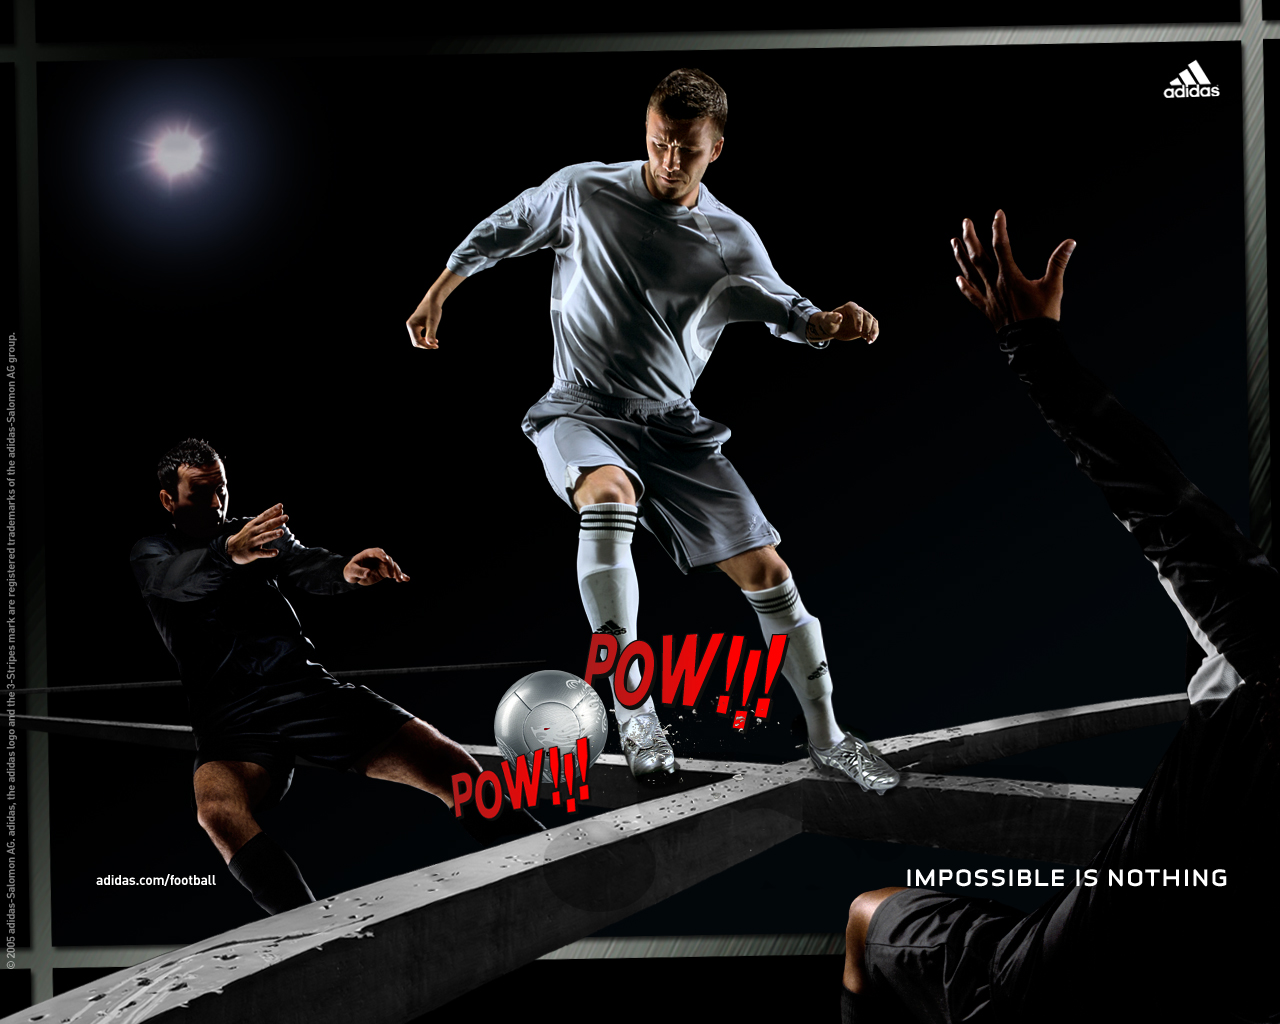 Football Stars 1280*1024 No - Impossible Is Nothing Adidas Football -  1280x1024 Wallpaper 